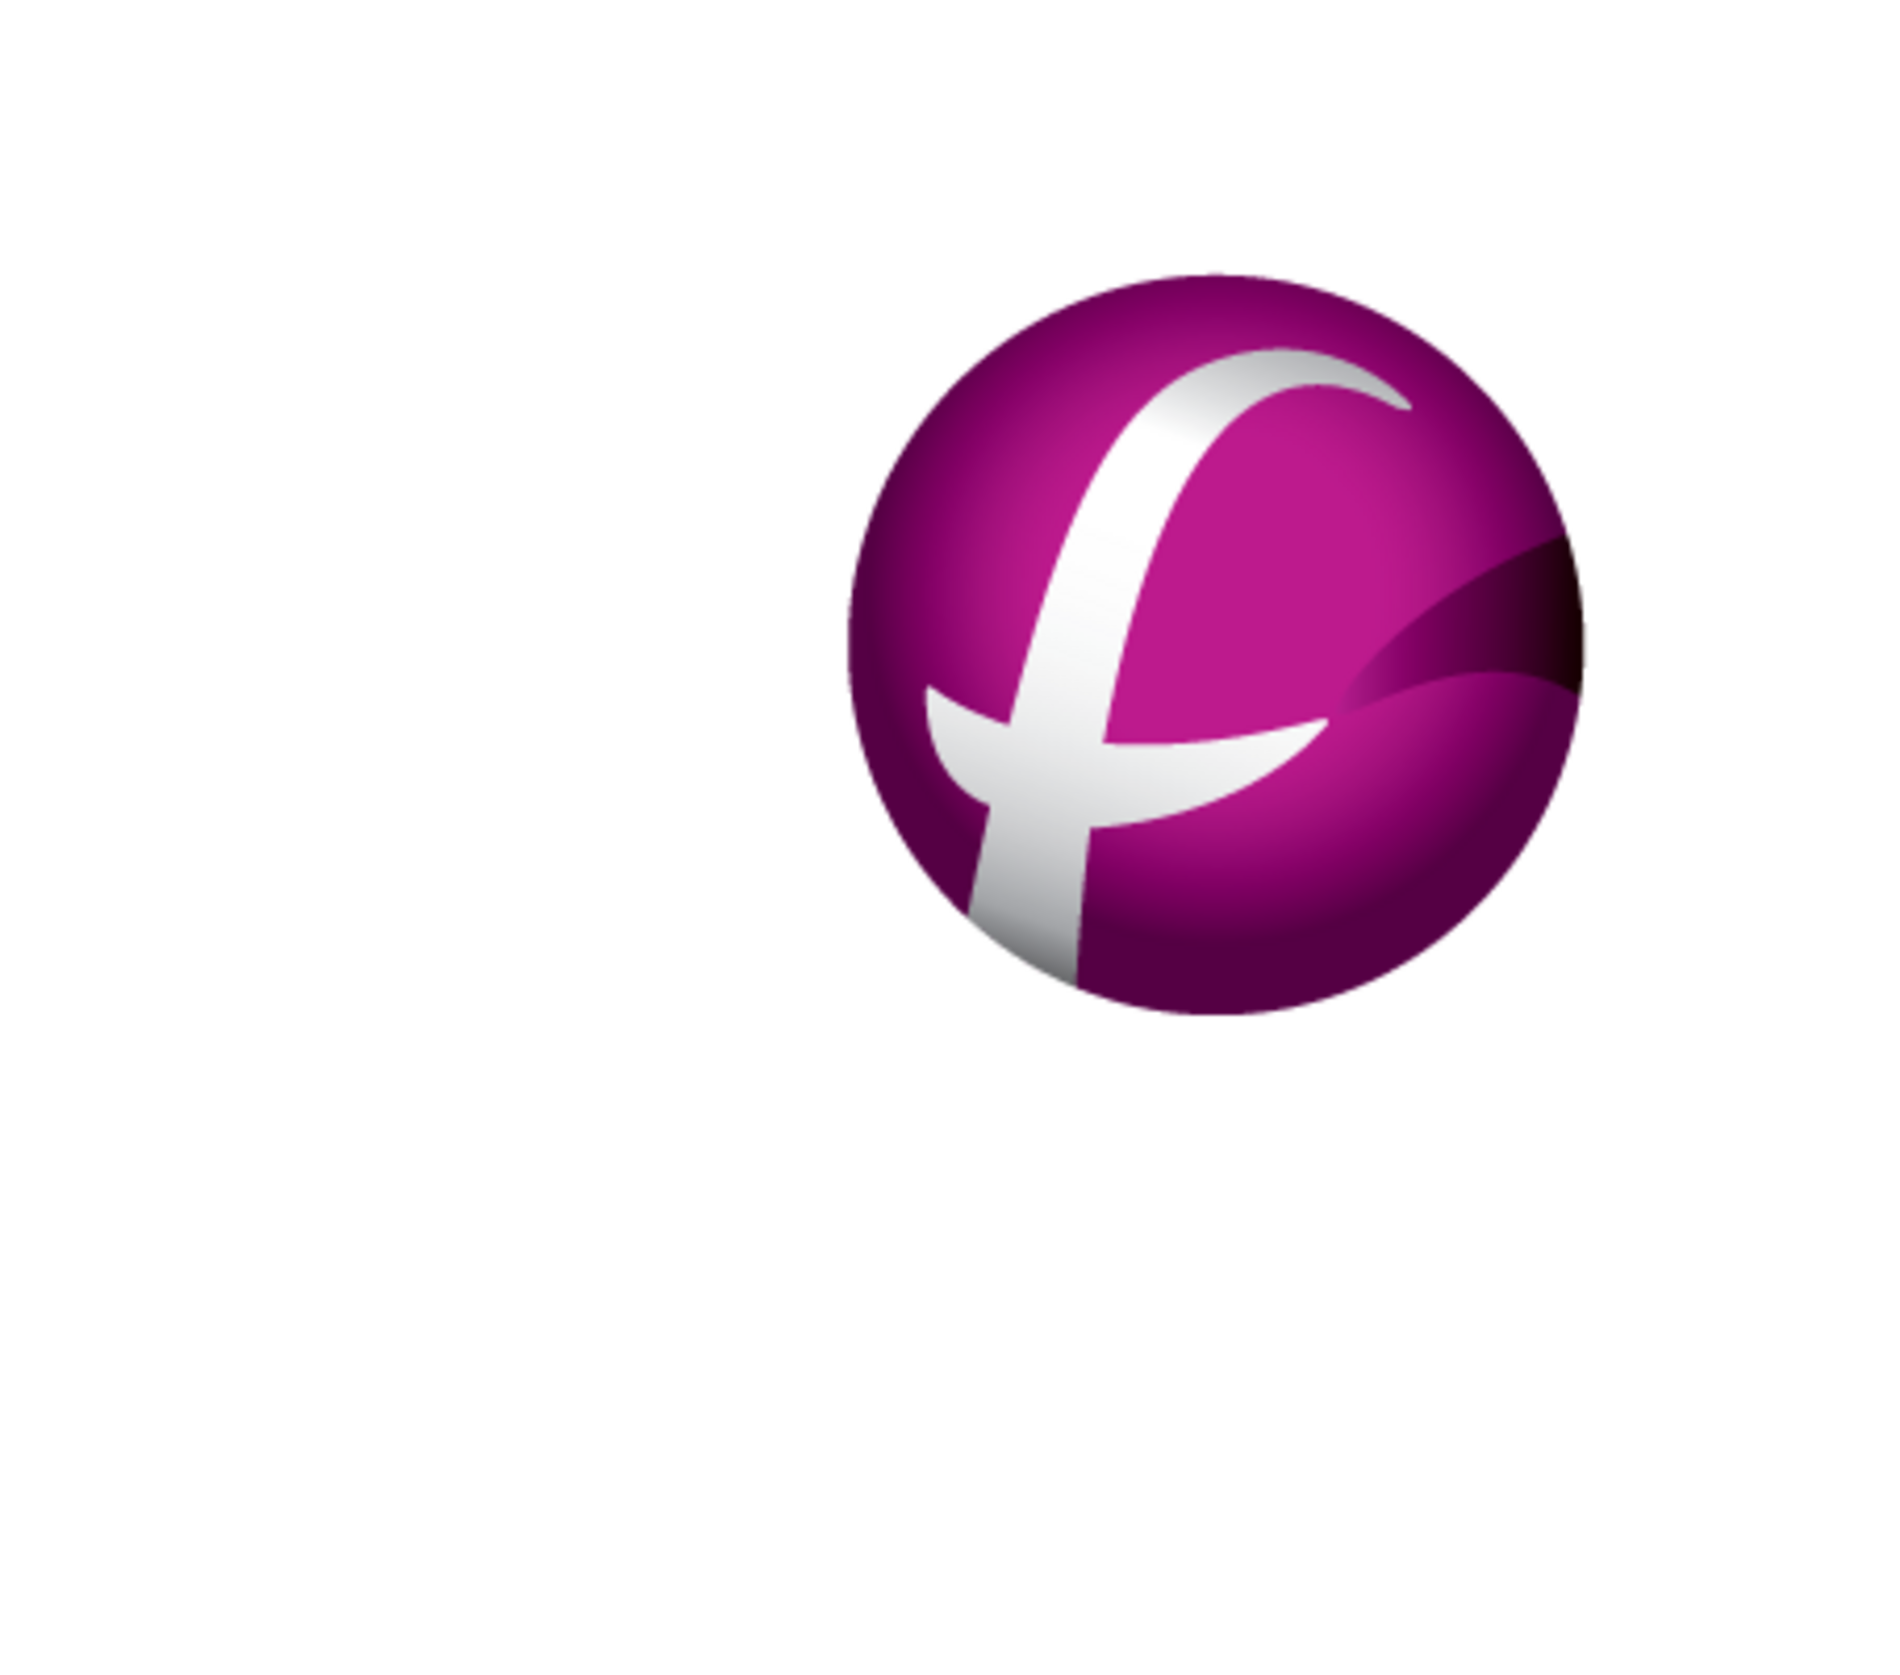 Fives Group